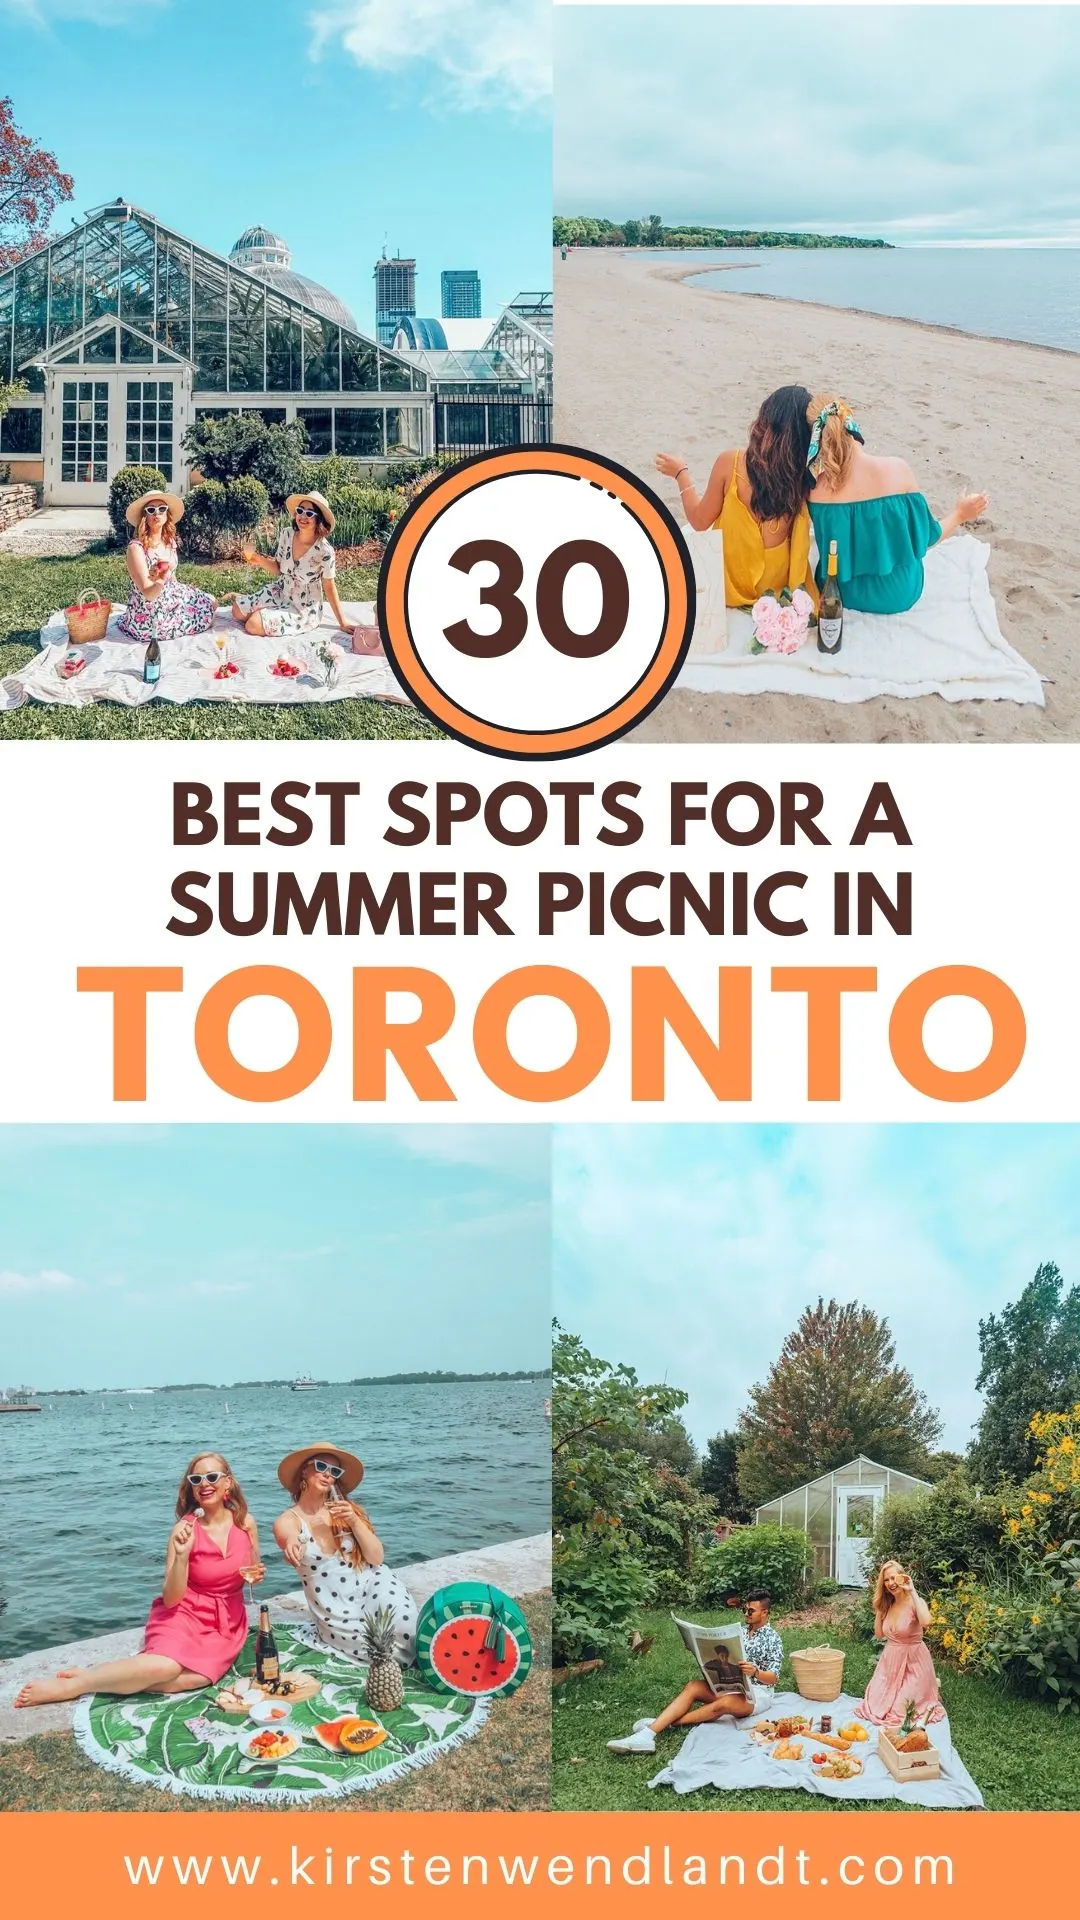 Looking for an incredible place to enjoy your next picnic in Toronto? This guide features some of the best picnic spots in Toronto from a local's perspective. Whether you're looking to picnic in a park, to spend your day sunning and snacking on a beach, prefer a garden hang, or want to check out a more unique destination, this guide has all of the best picnic spots for you to choose from.